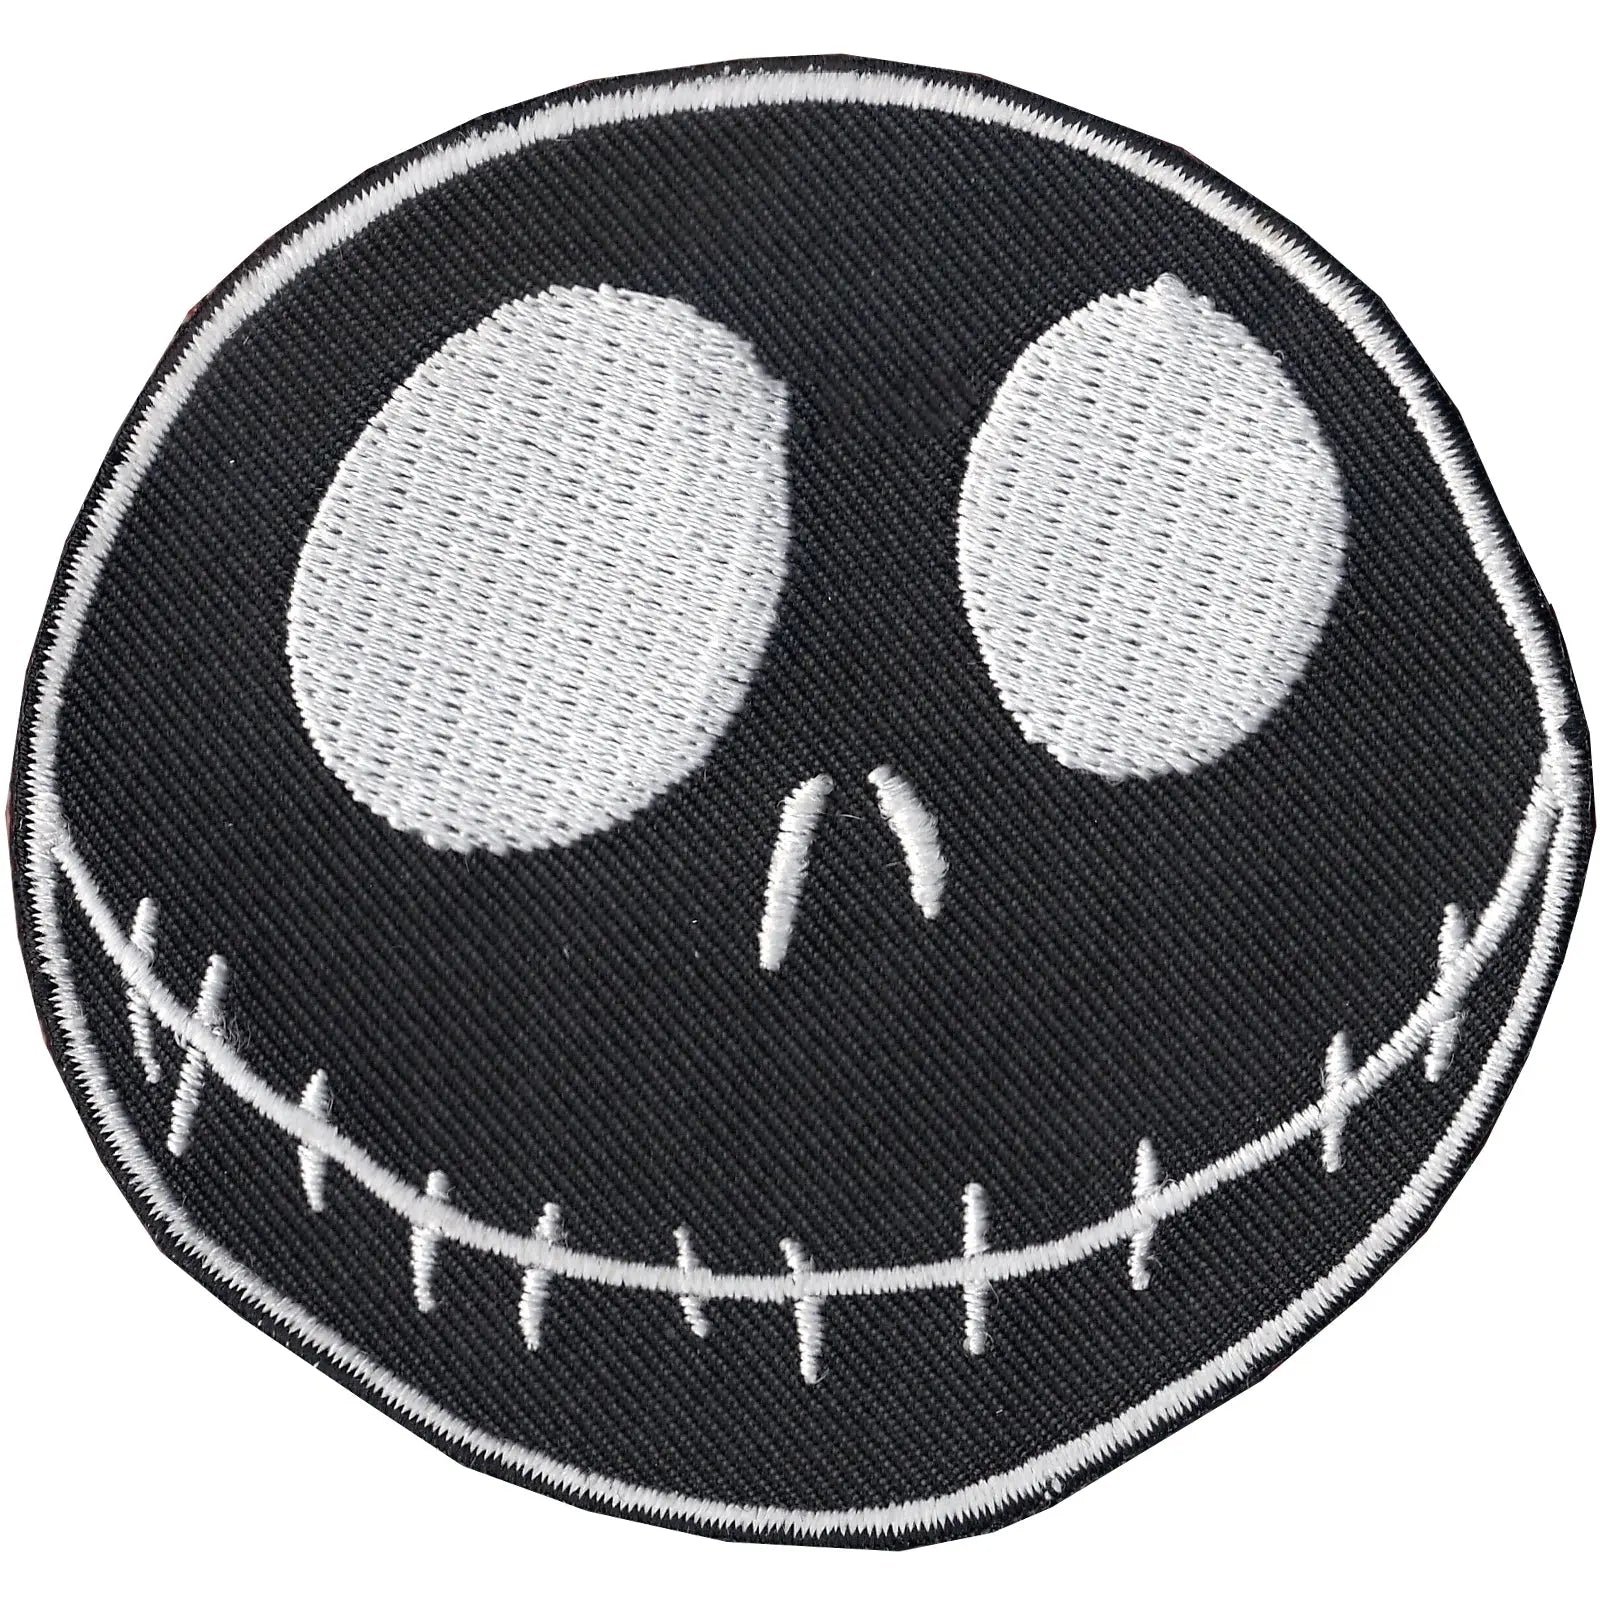 Disney Iron On Patch - Patched - Nightmare Before Christmas - 4 pk.